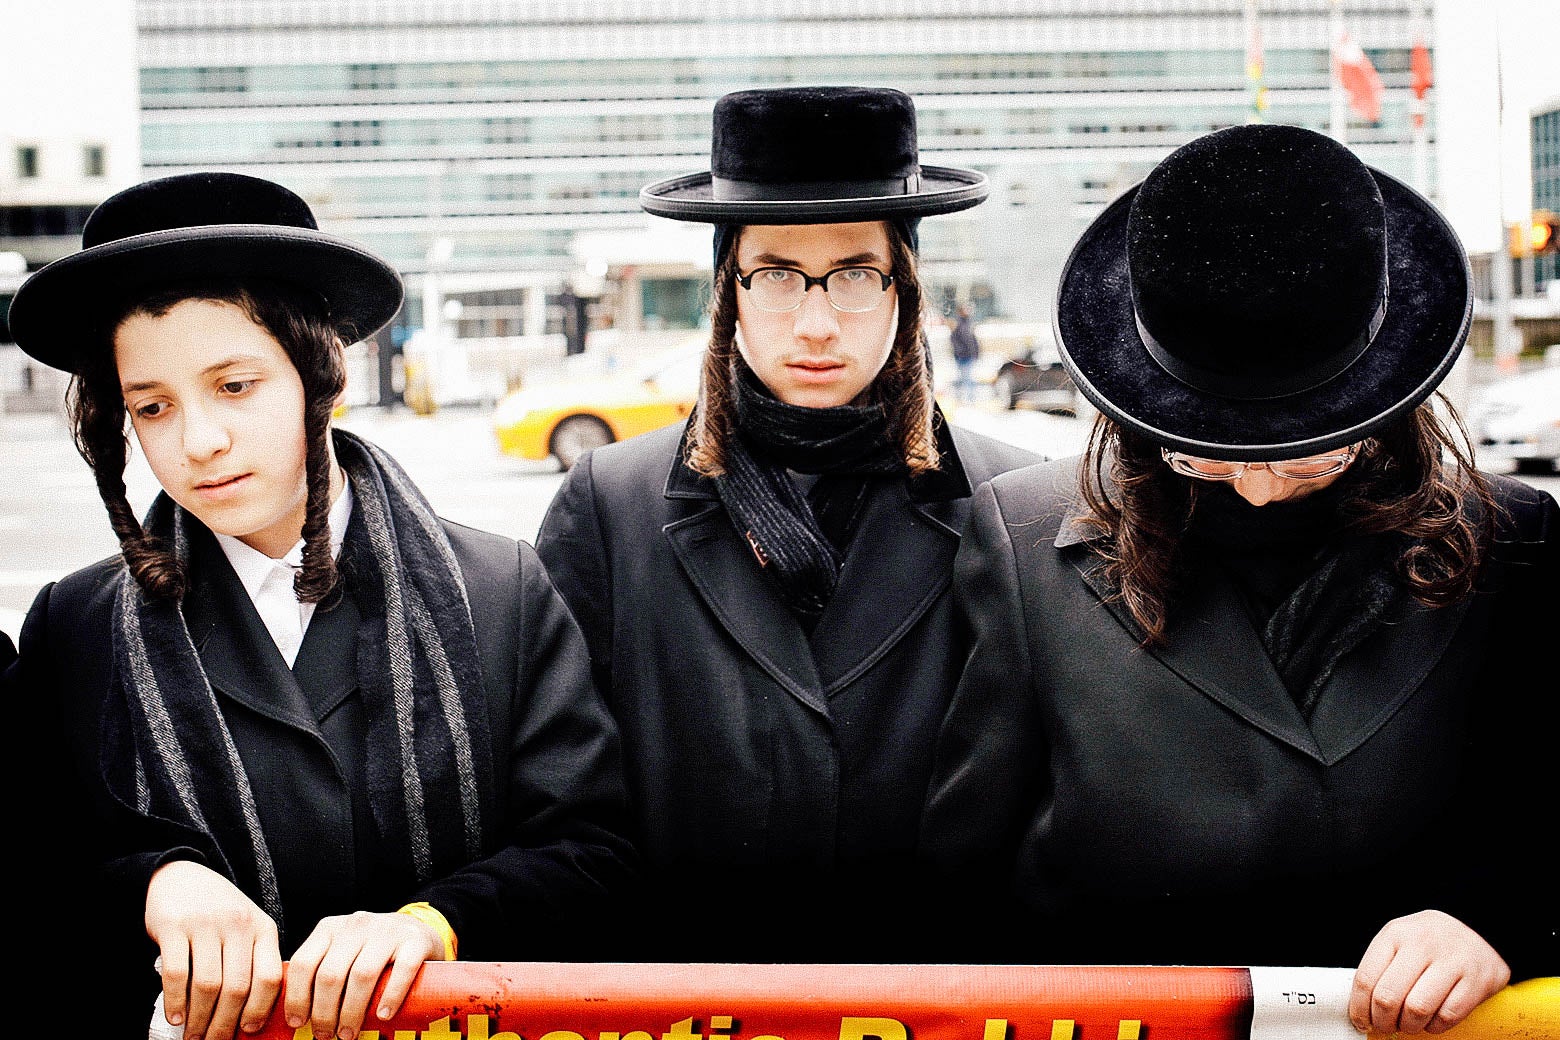 Orthodox Jews in front of the United Nations headquarters in New York City.